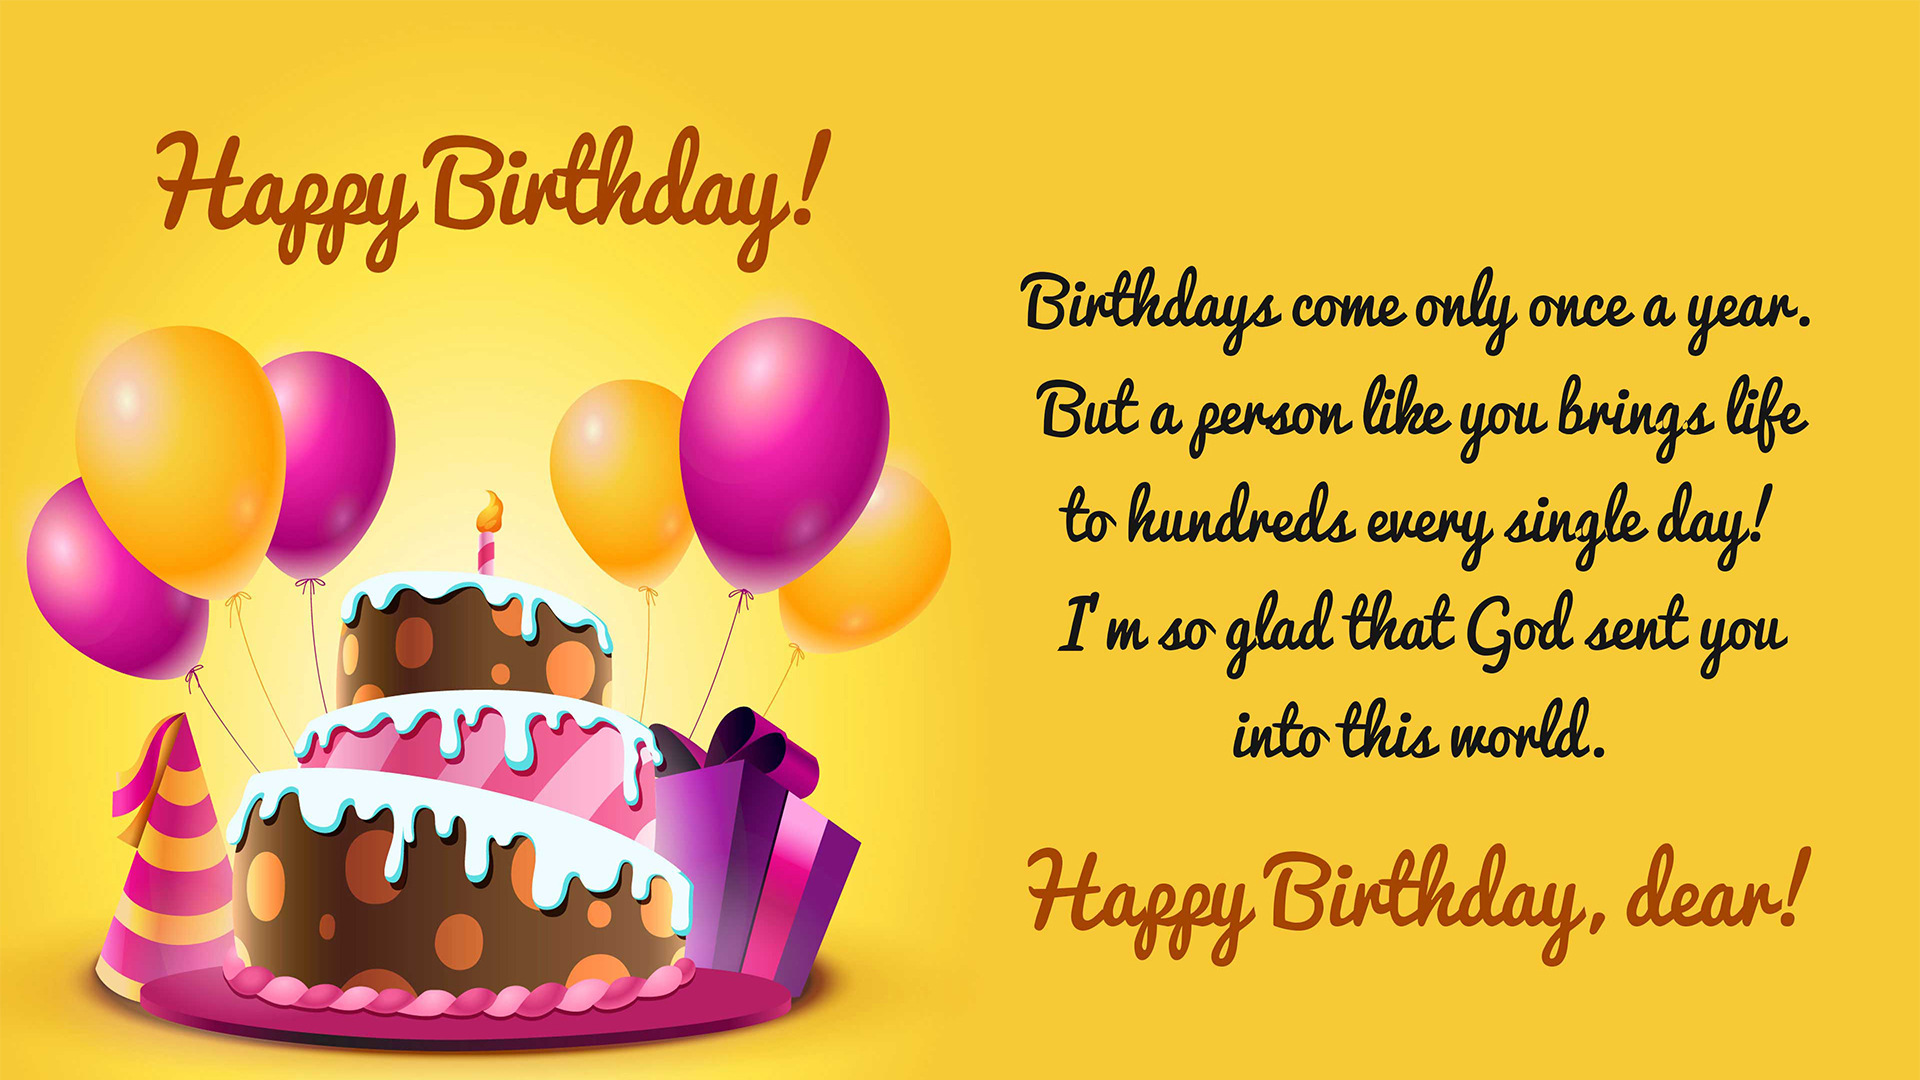 Happy Birthday Wishes Images Birthday Greetings & Messages.